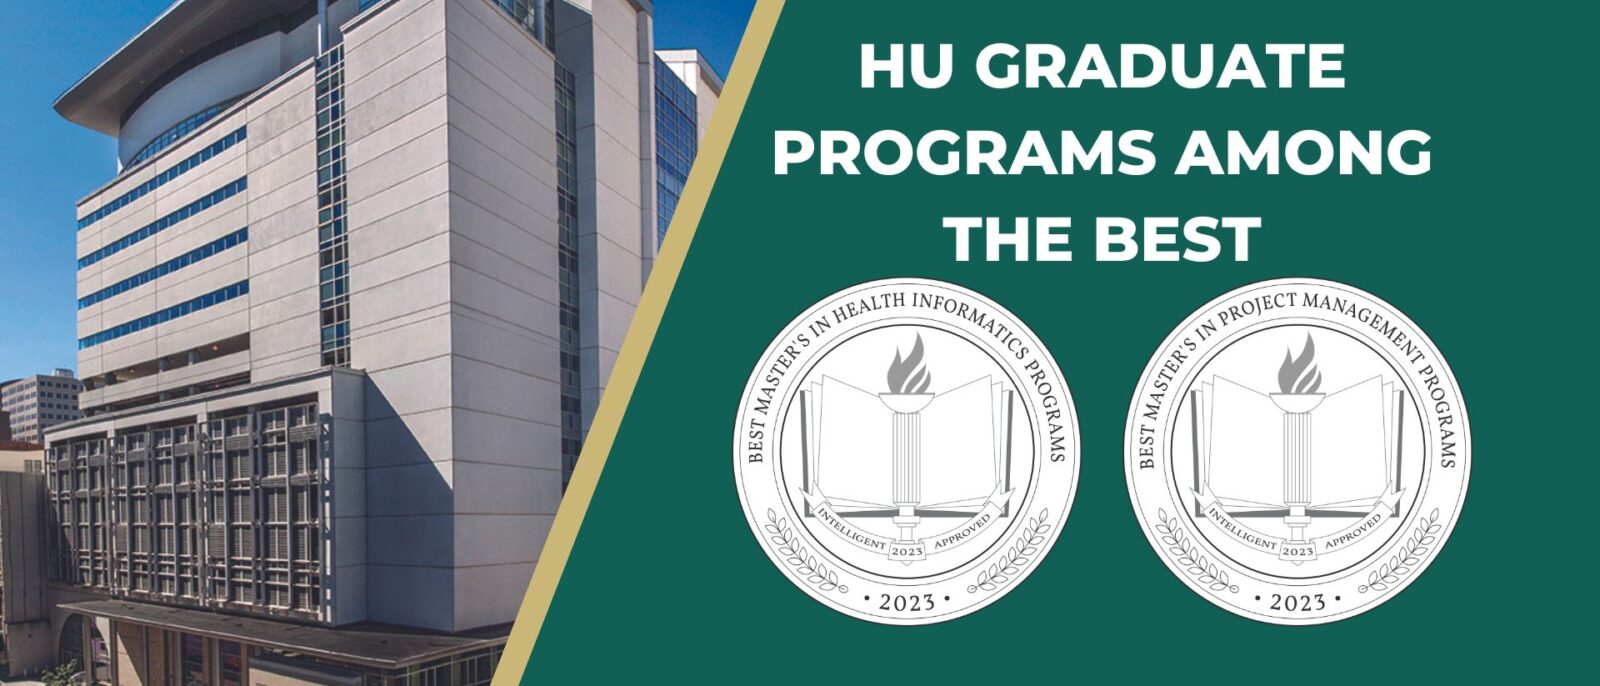 Ranking places two HU graduate programs among the best